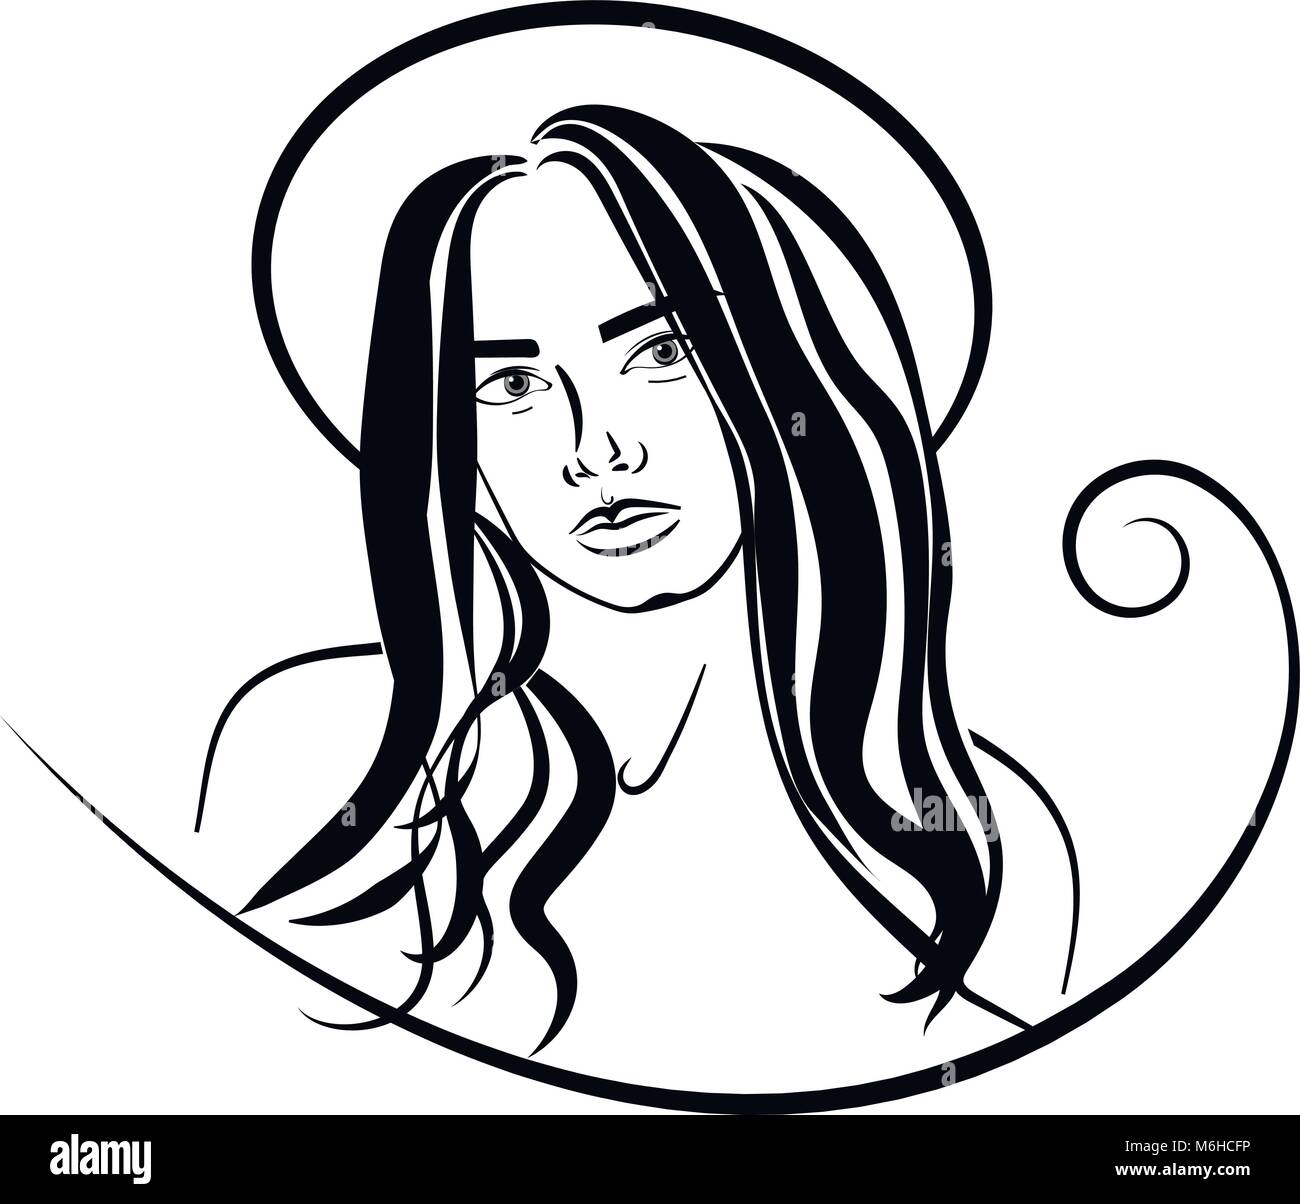 Hairstyle contour girl wearing hat vector banner for beauty salon. Cute woman Stock Vector